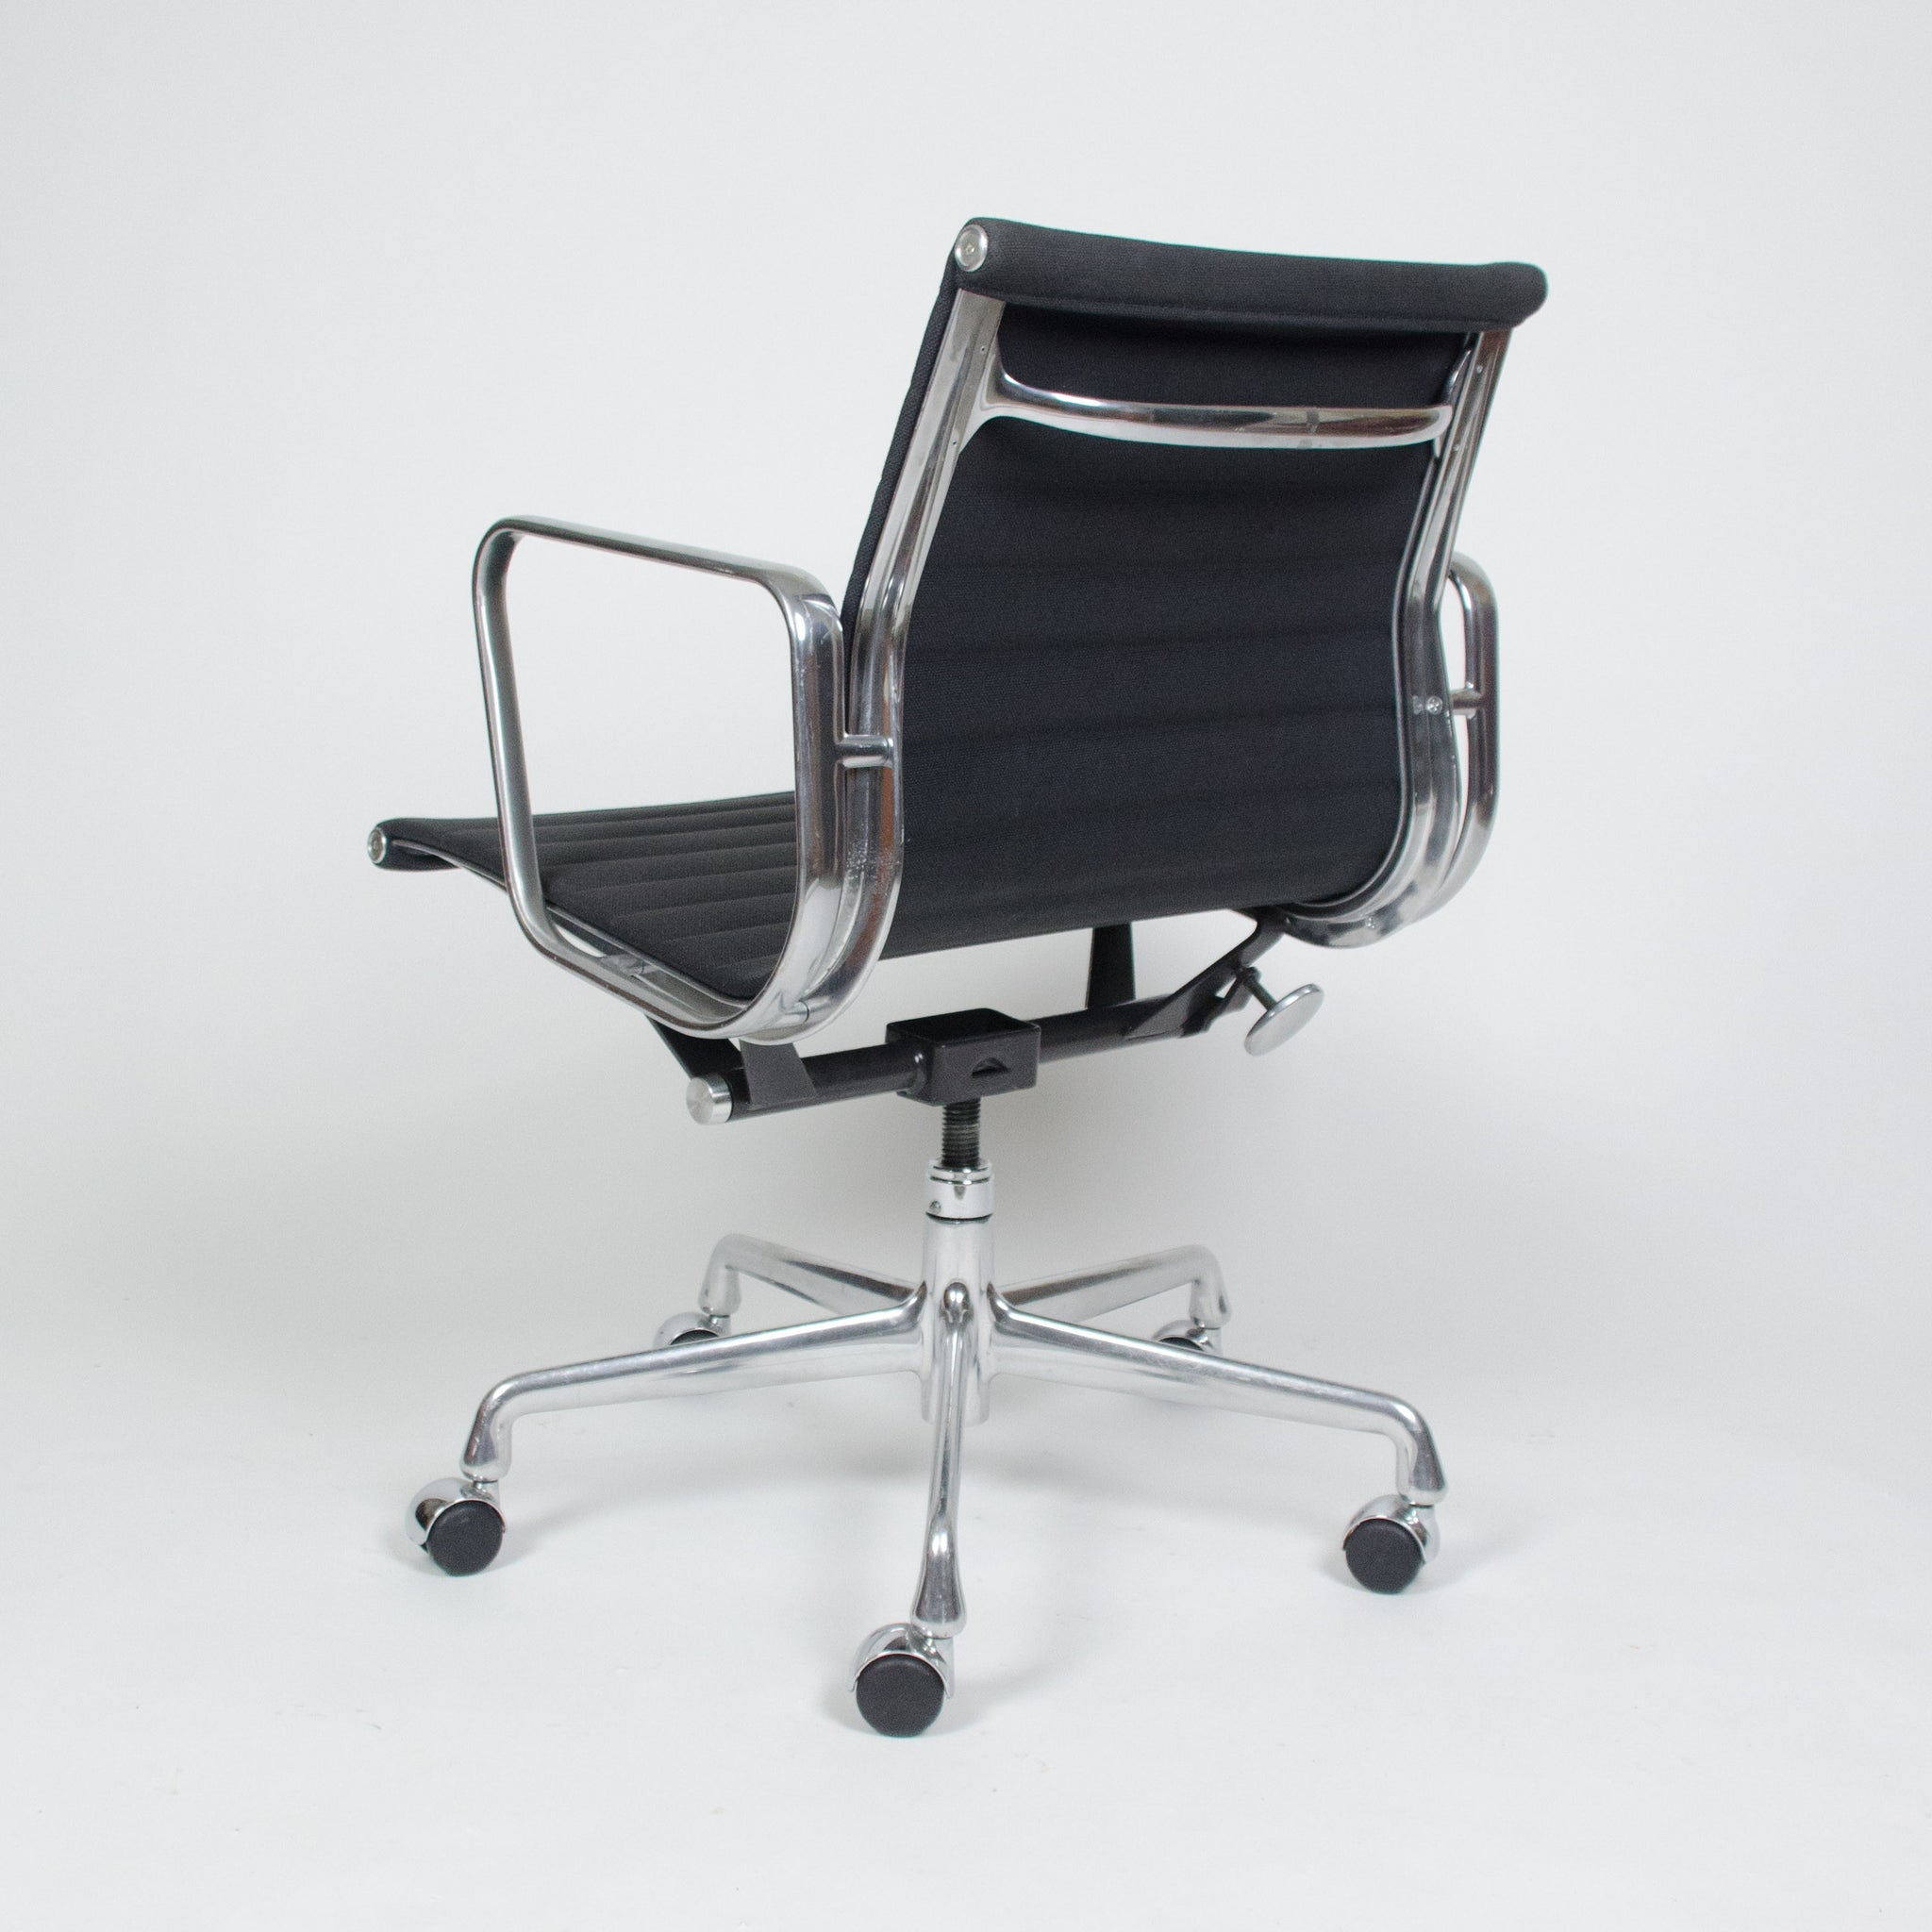 SOLD Eames Herman Miller Aluminum Group Executive Desk Chairs Black Fabric 16 Available